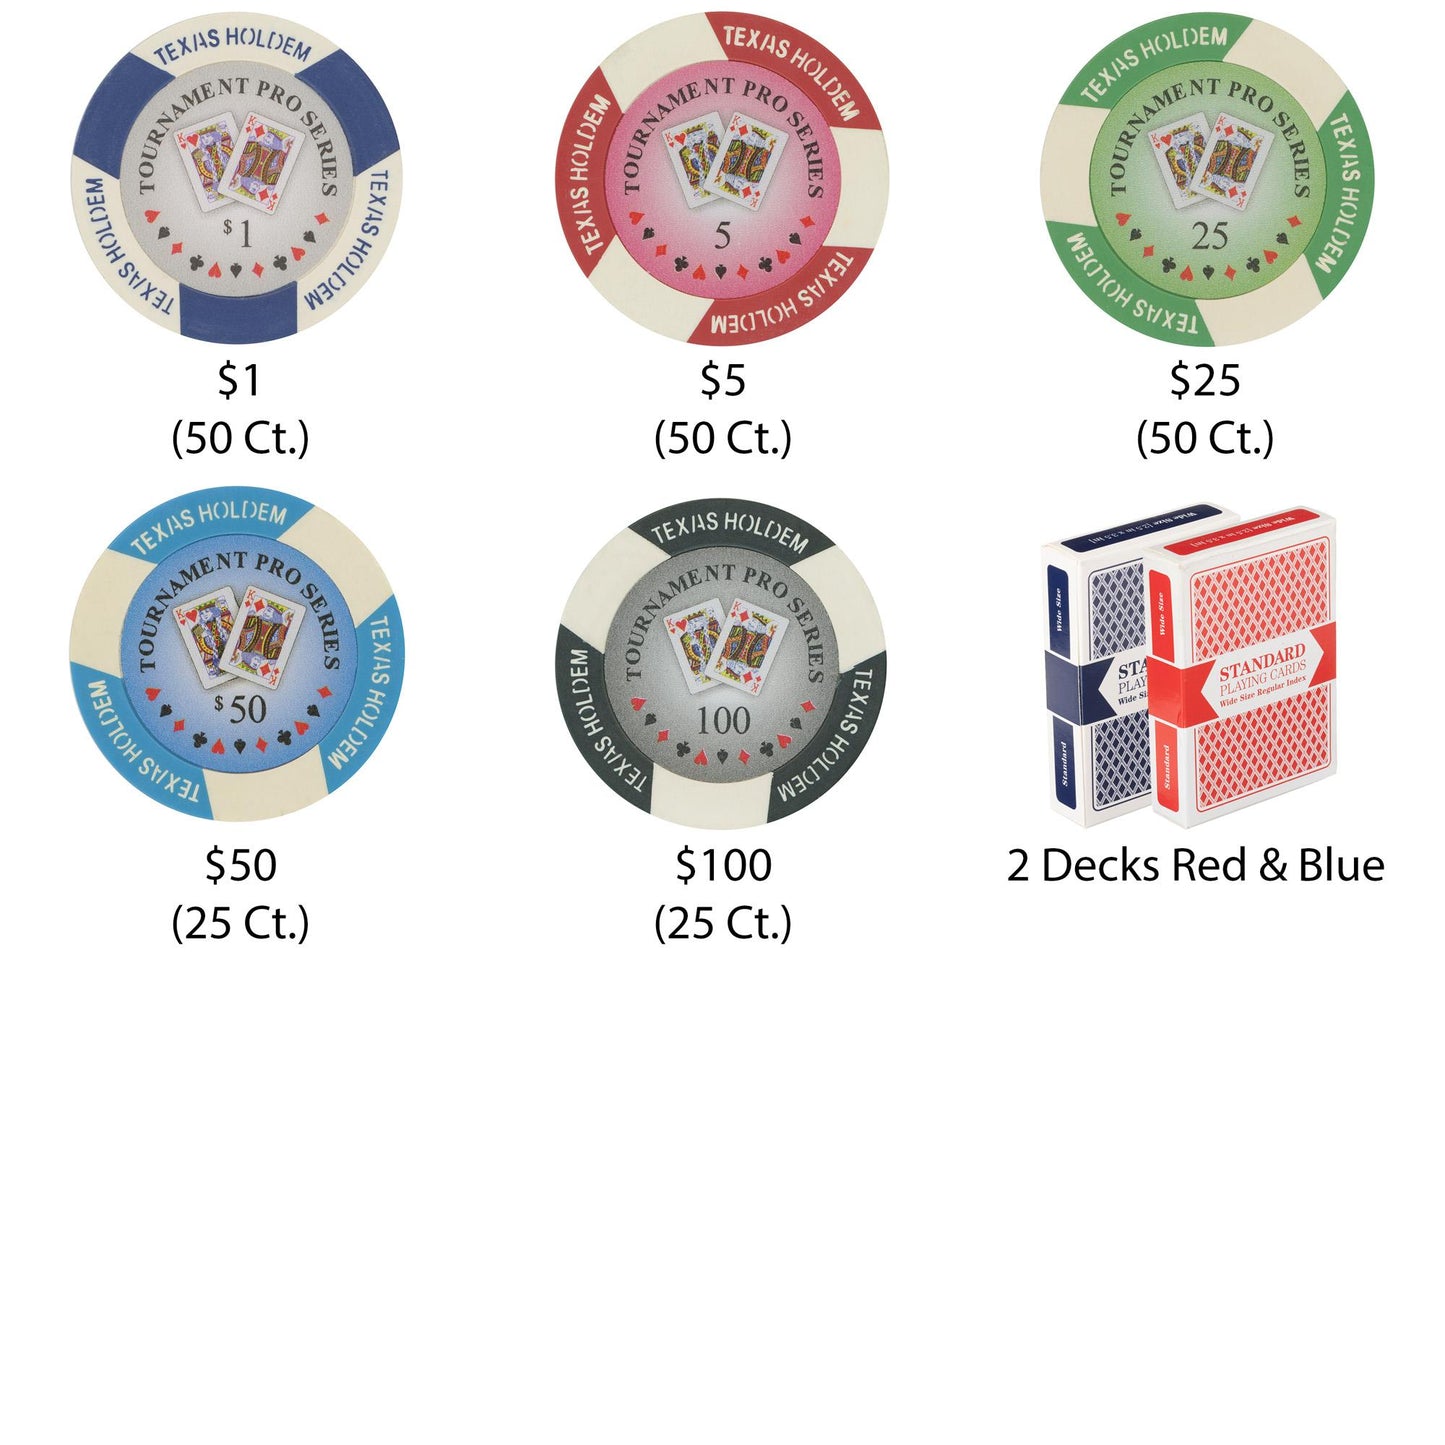 200 Tournament Pro Poker Chips with Wooden Carousel